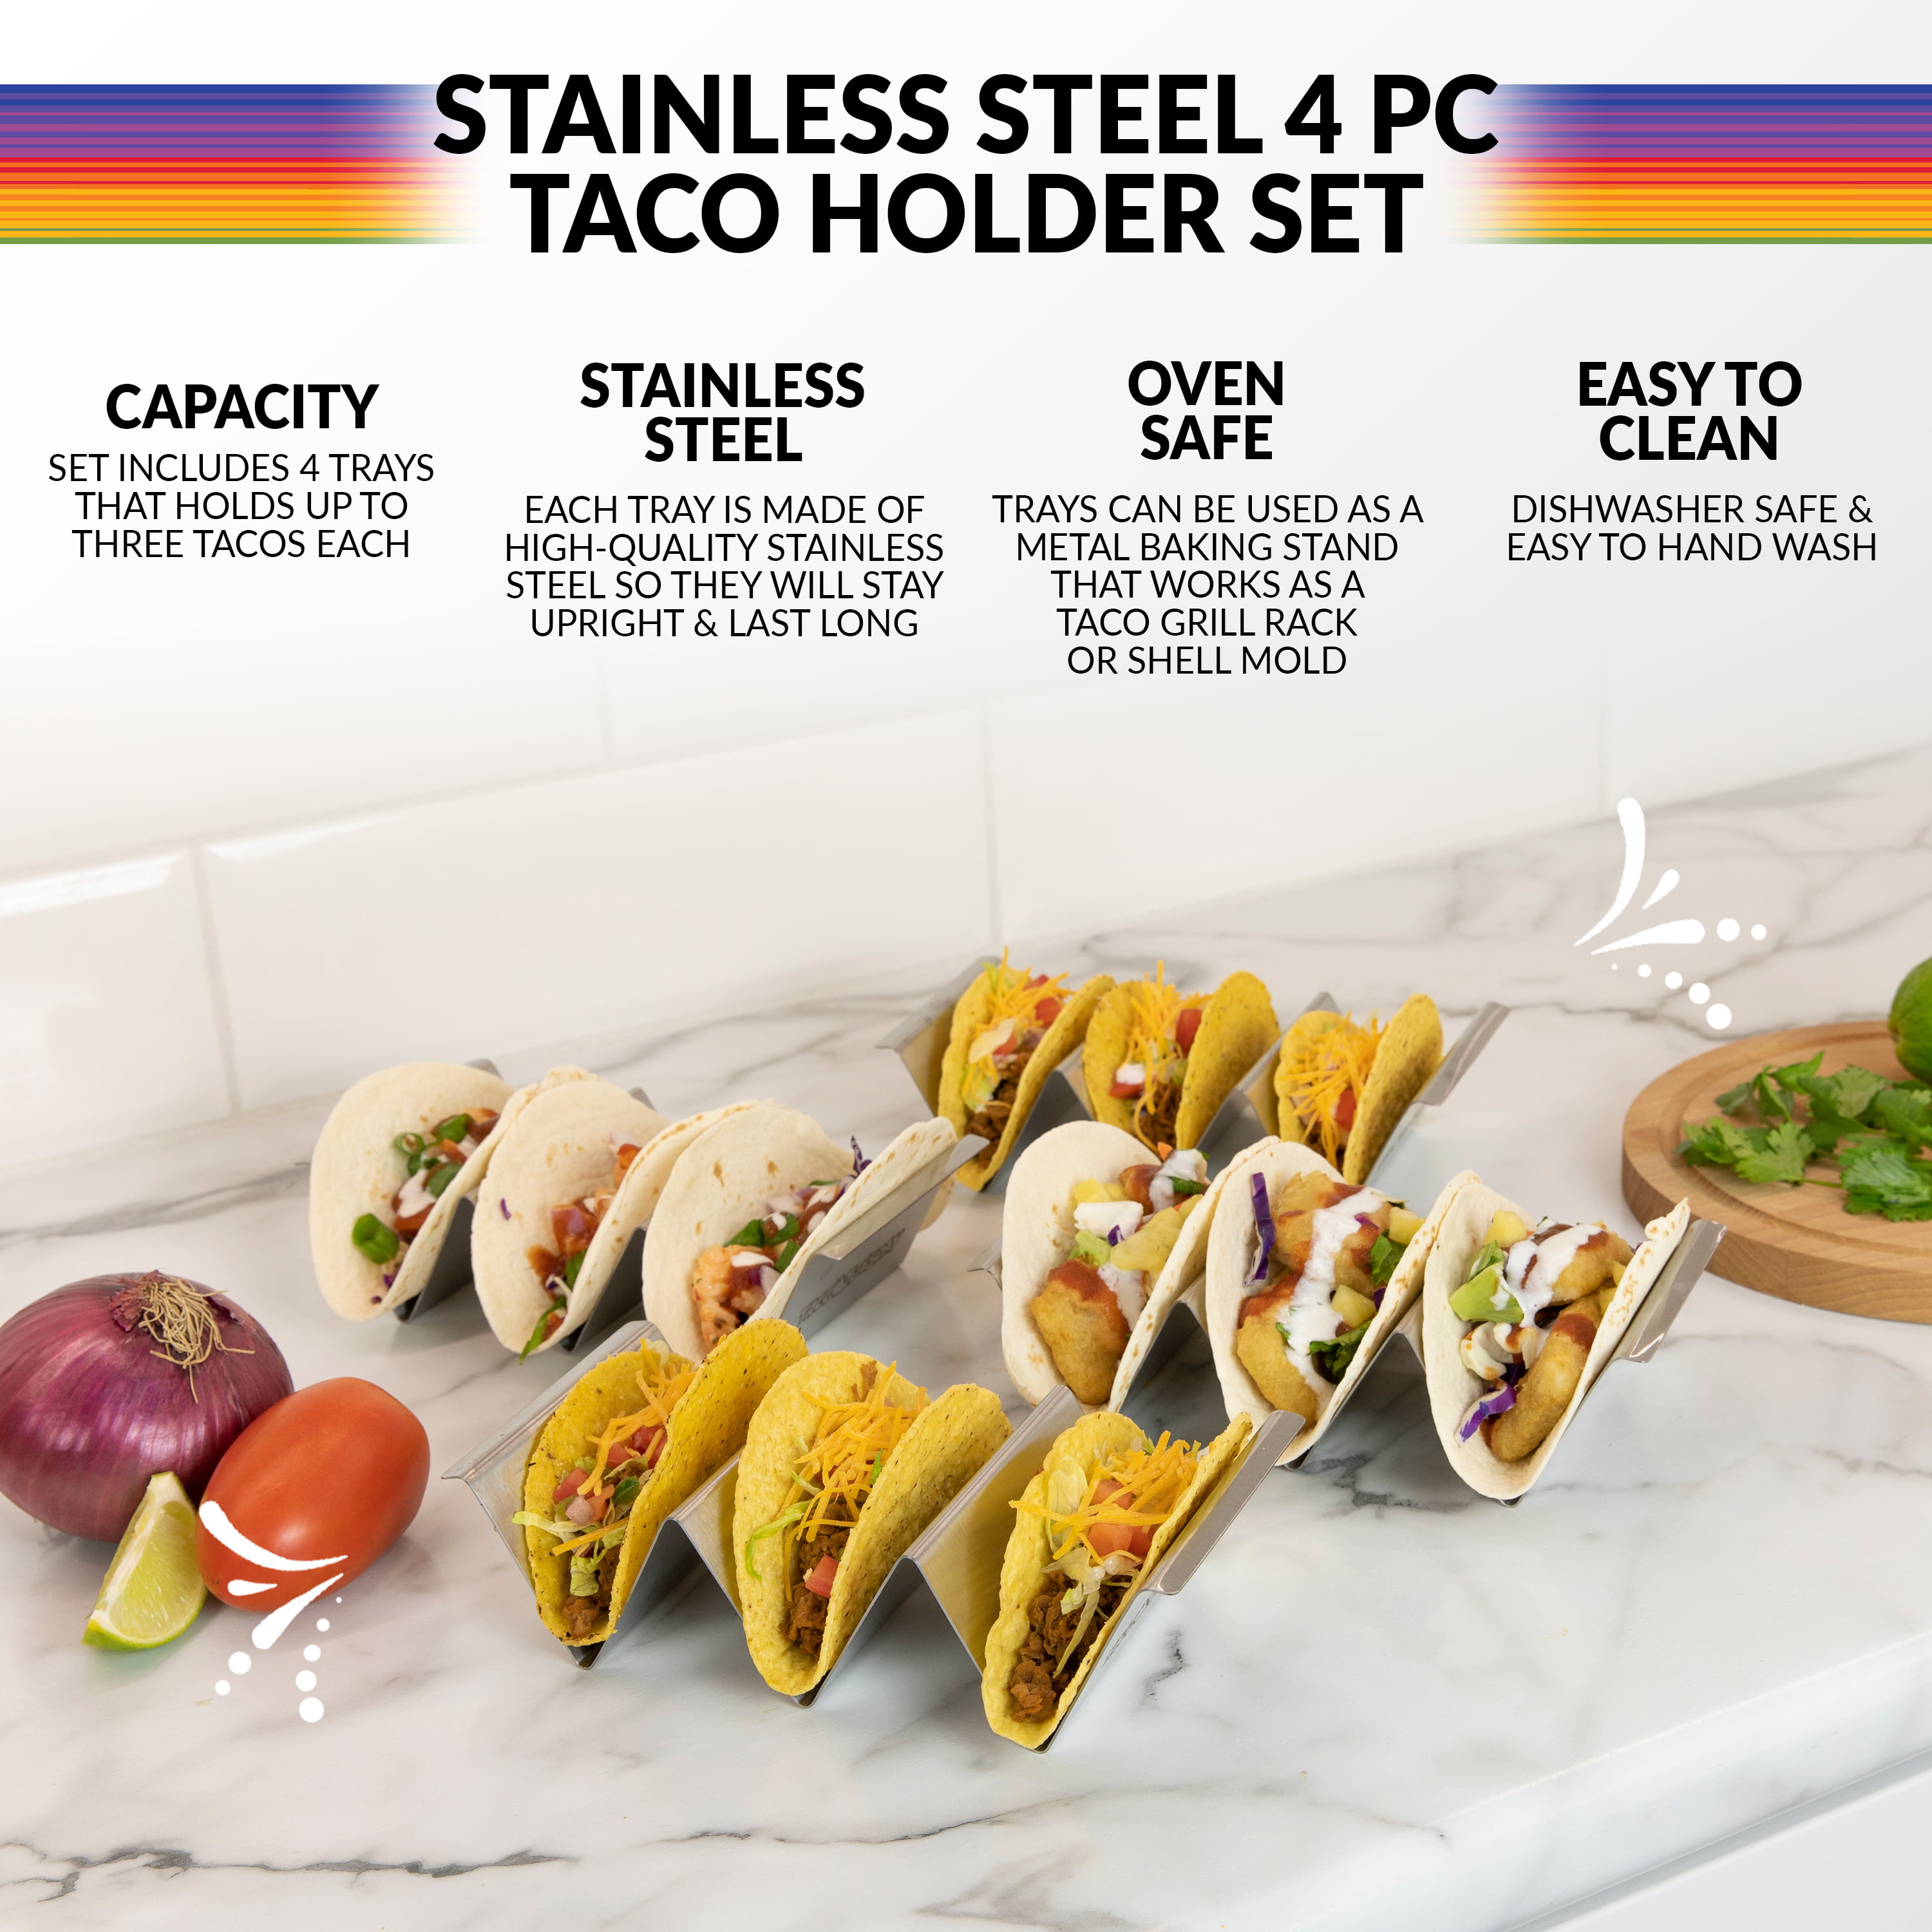 Racks Hold Soft & Hard Shell Tacos 4 Pack Premium Taco Holder Stands,Stainless Steel Taco Rack Holds Up To 12 Tacos,Oven Safe for Baking,Dishwasher and Grill Safe,Stackable Trays 